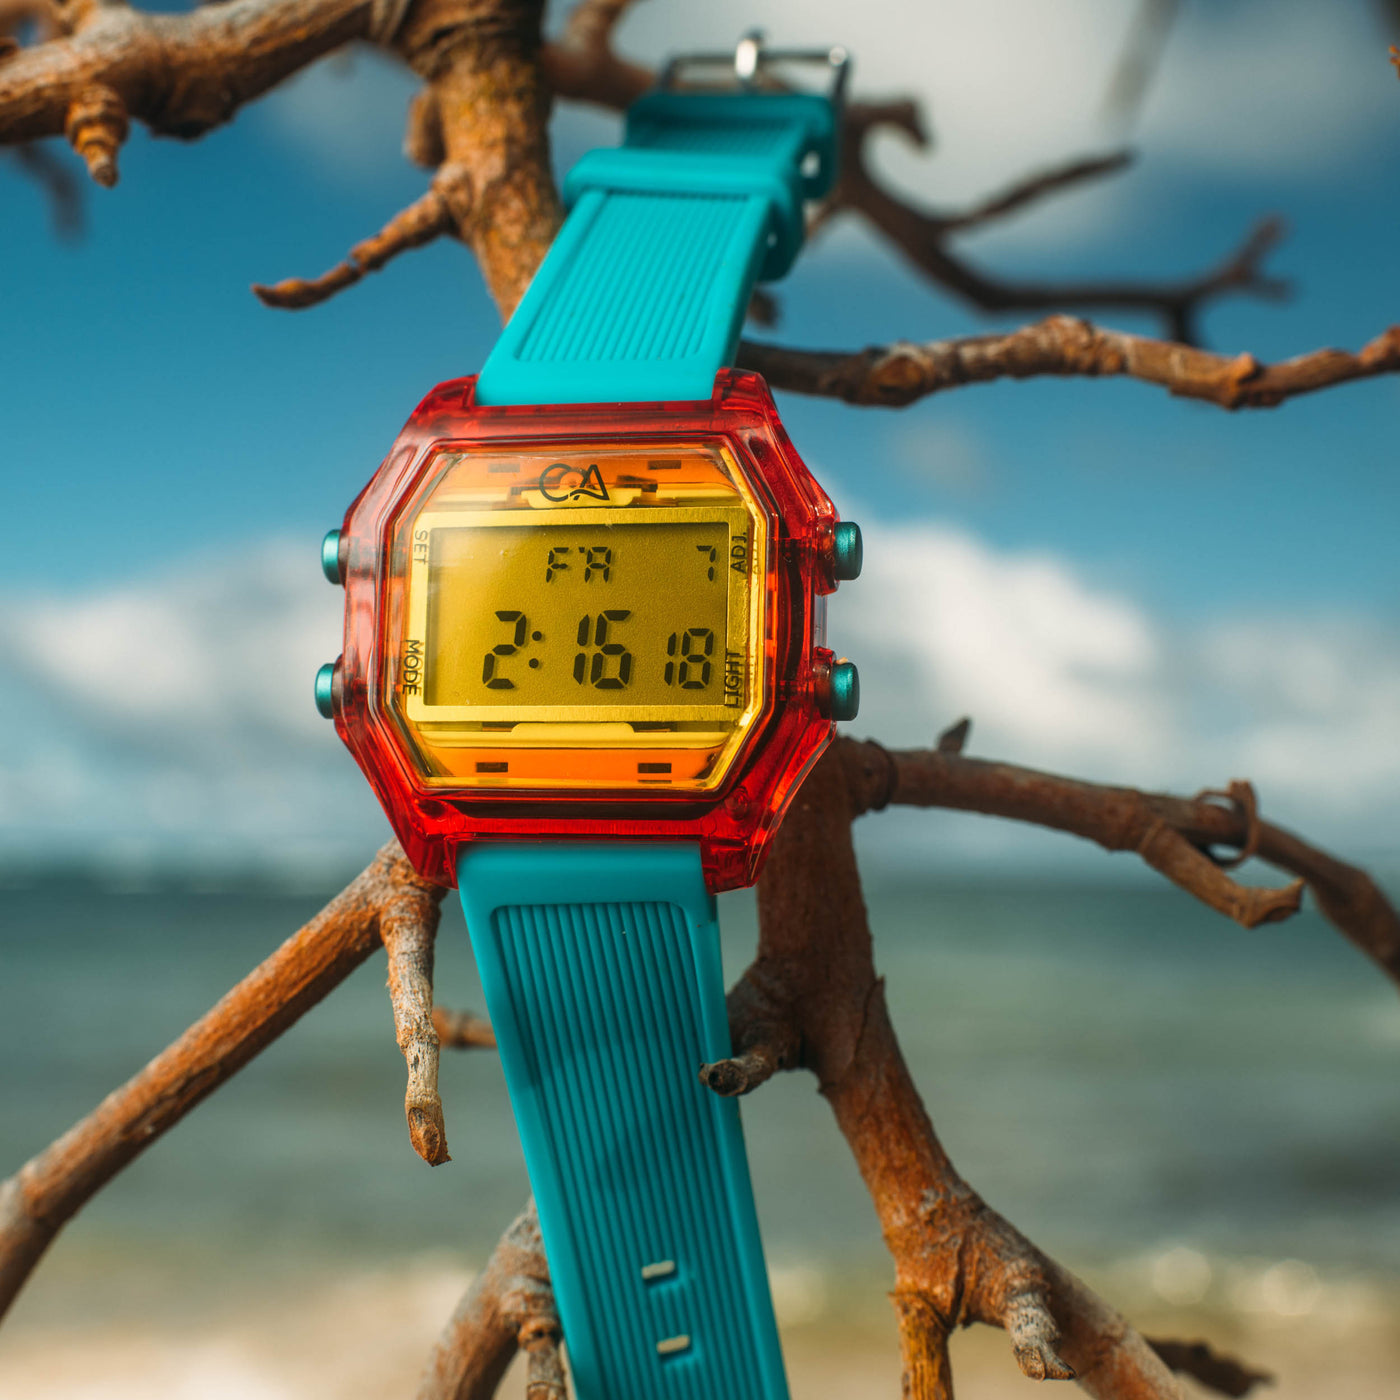 CALIFORNIA VENICE BEACH RED TEAL YELLOW WATCH IN A TREE